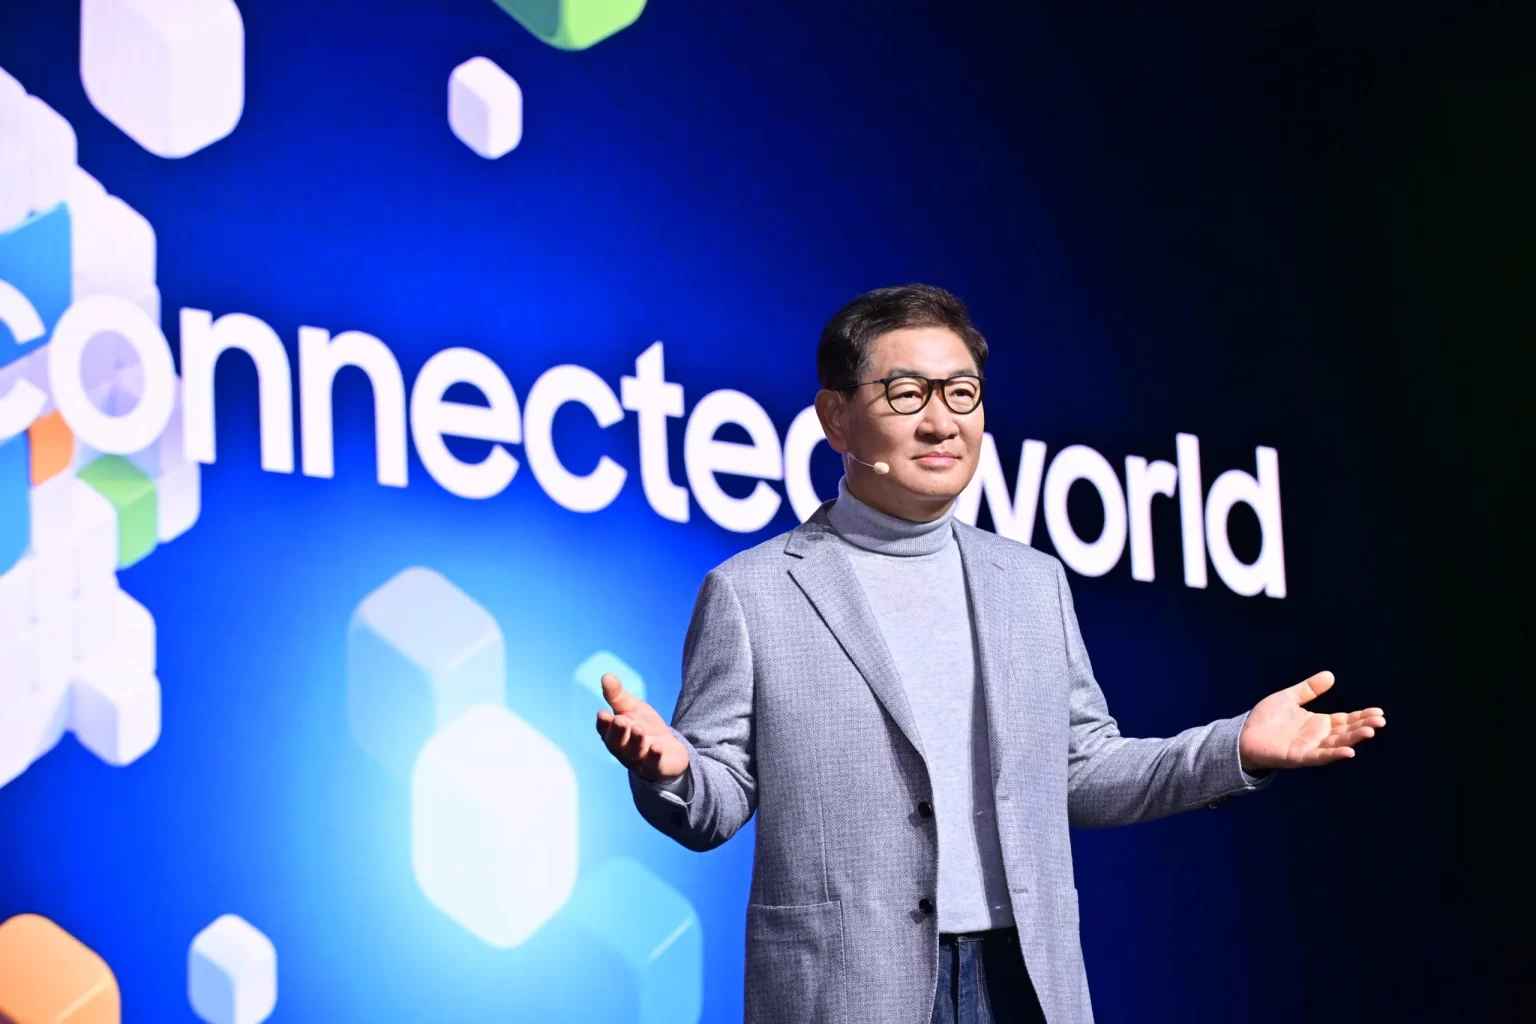 JH Han CES 2023 scaled 1 1536x1024 - At CES 2023, Samsung share a vision for a Calmer, more connected world